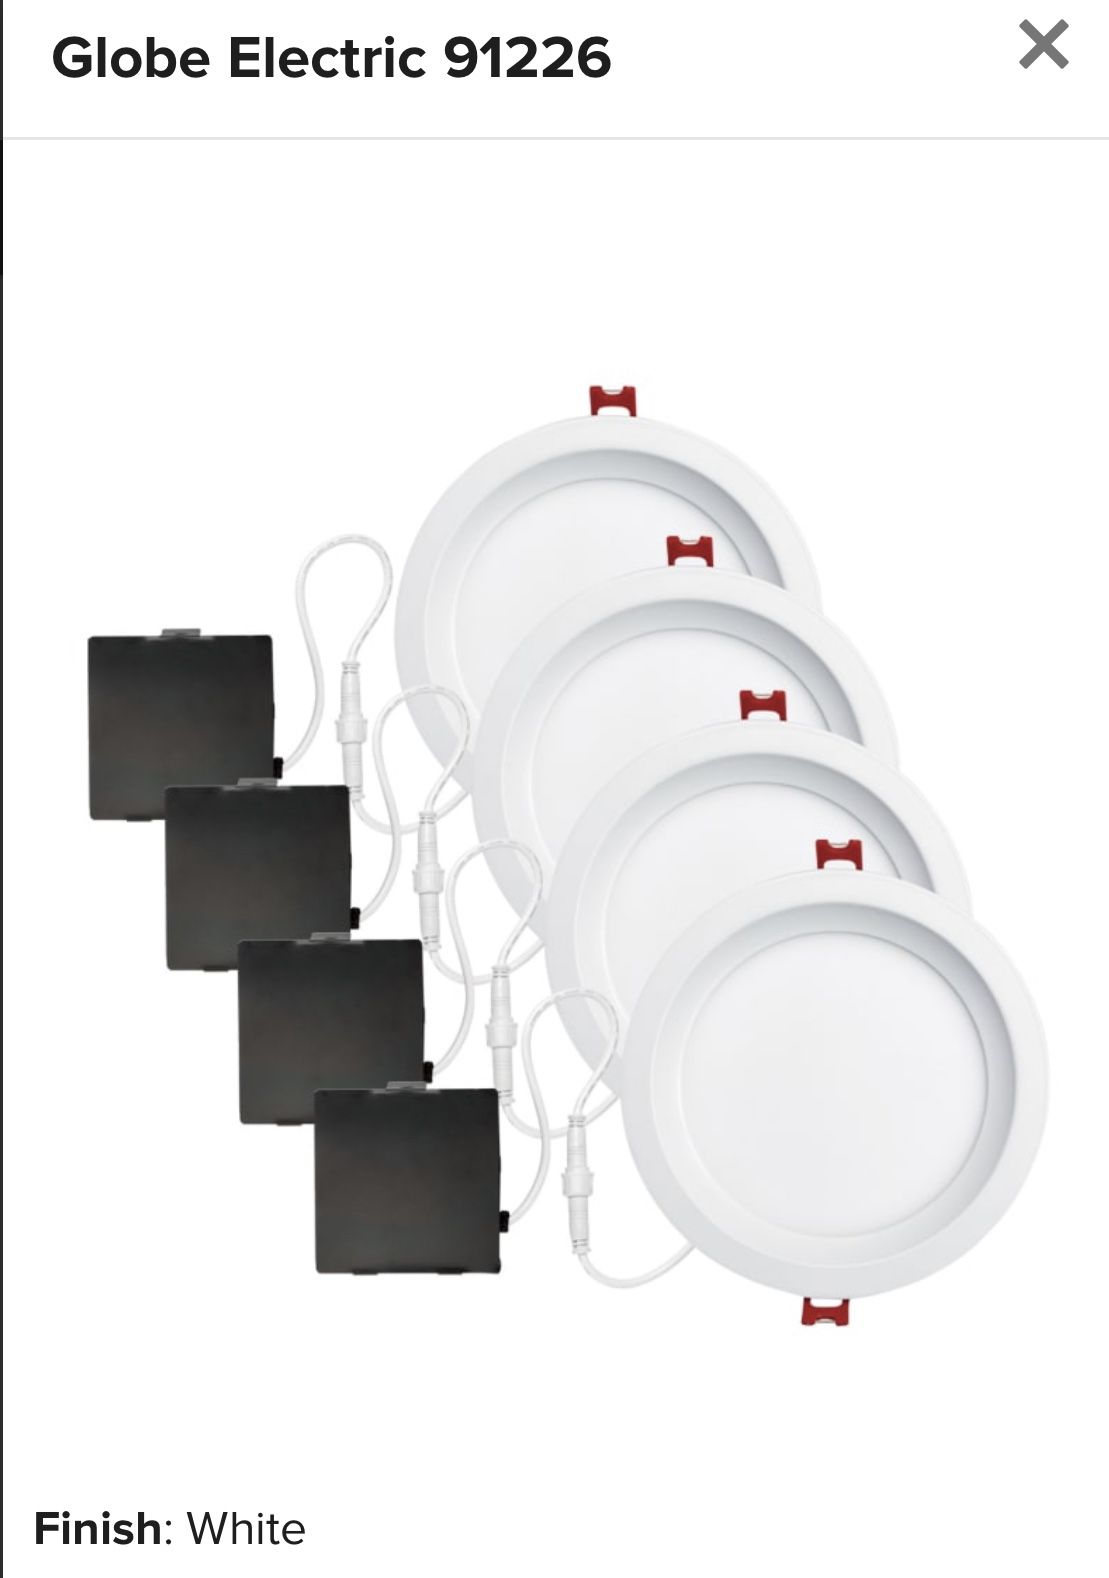 Globe Electric 91226 White Set of 4 Ultra Slim 6" Integrated LED Recessed Lighting - Dimmable and Insulated Ceiling Rated